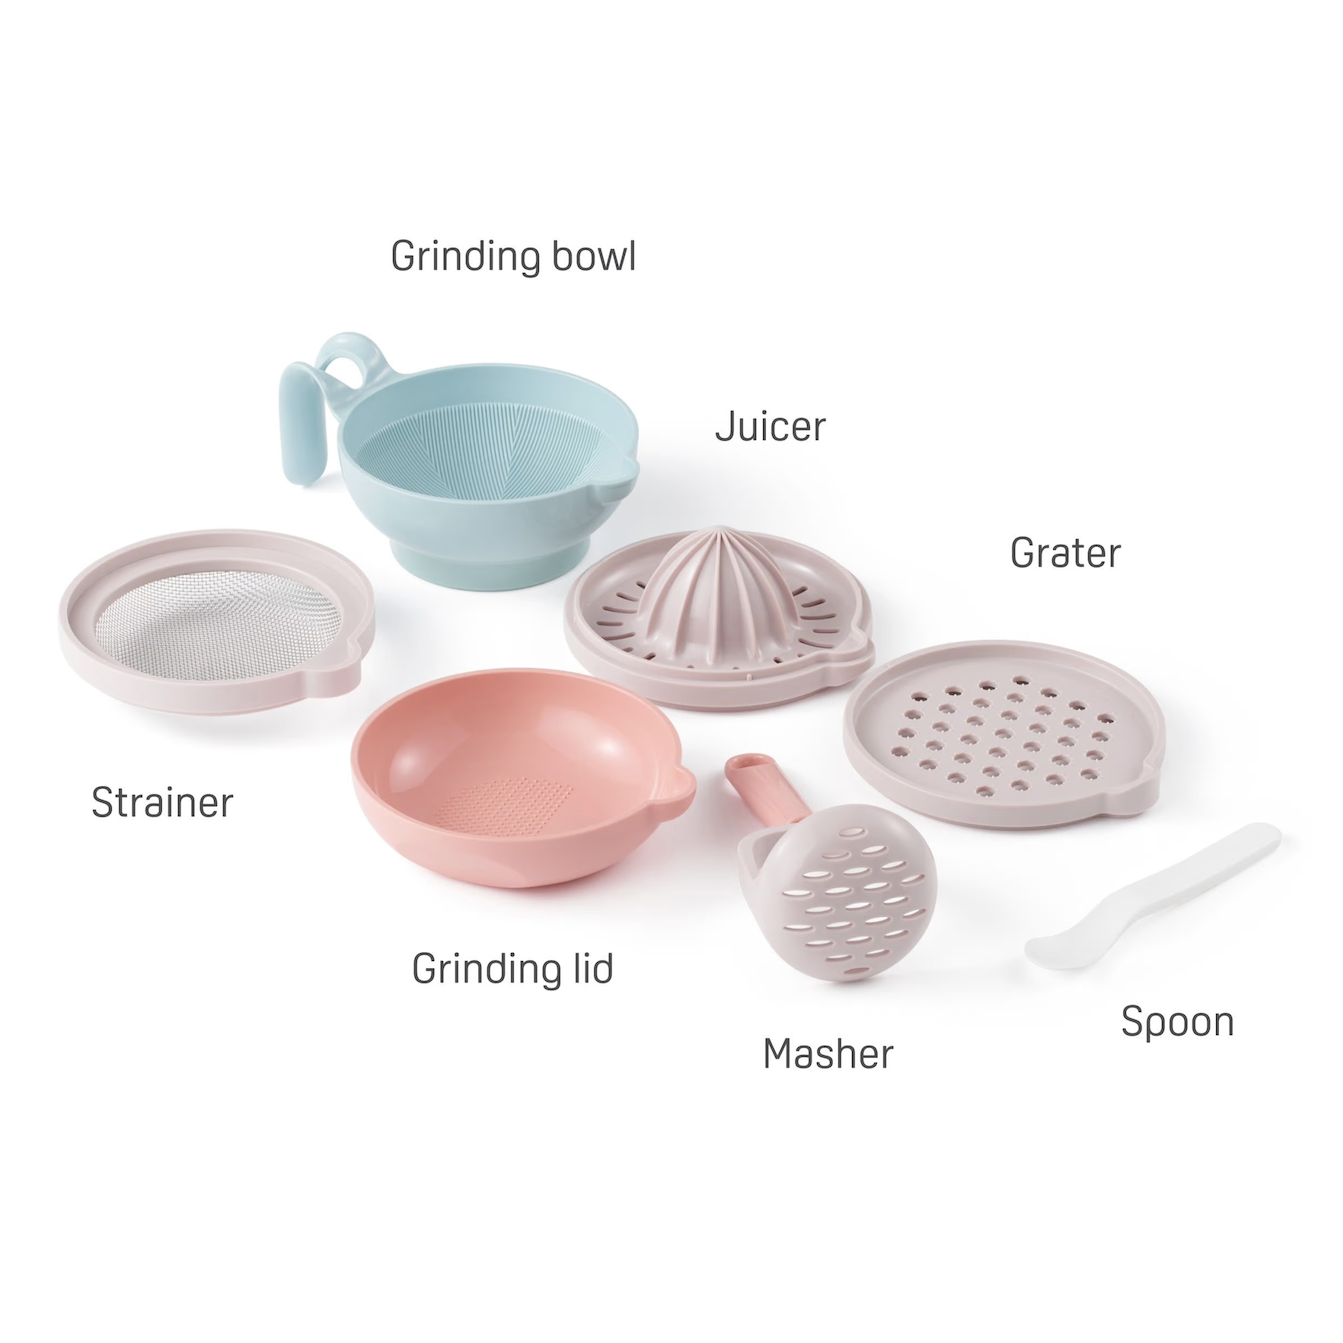 Baby food grinder, masher and bowl, and microwave steamer